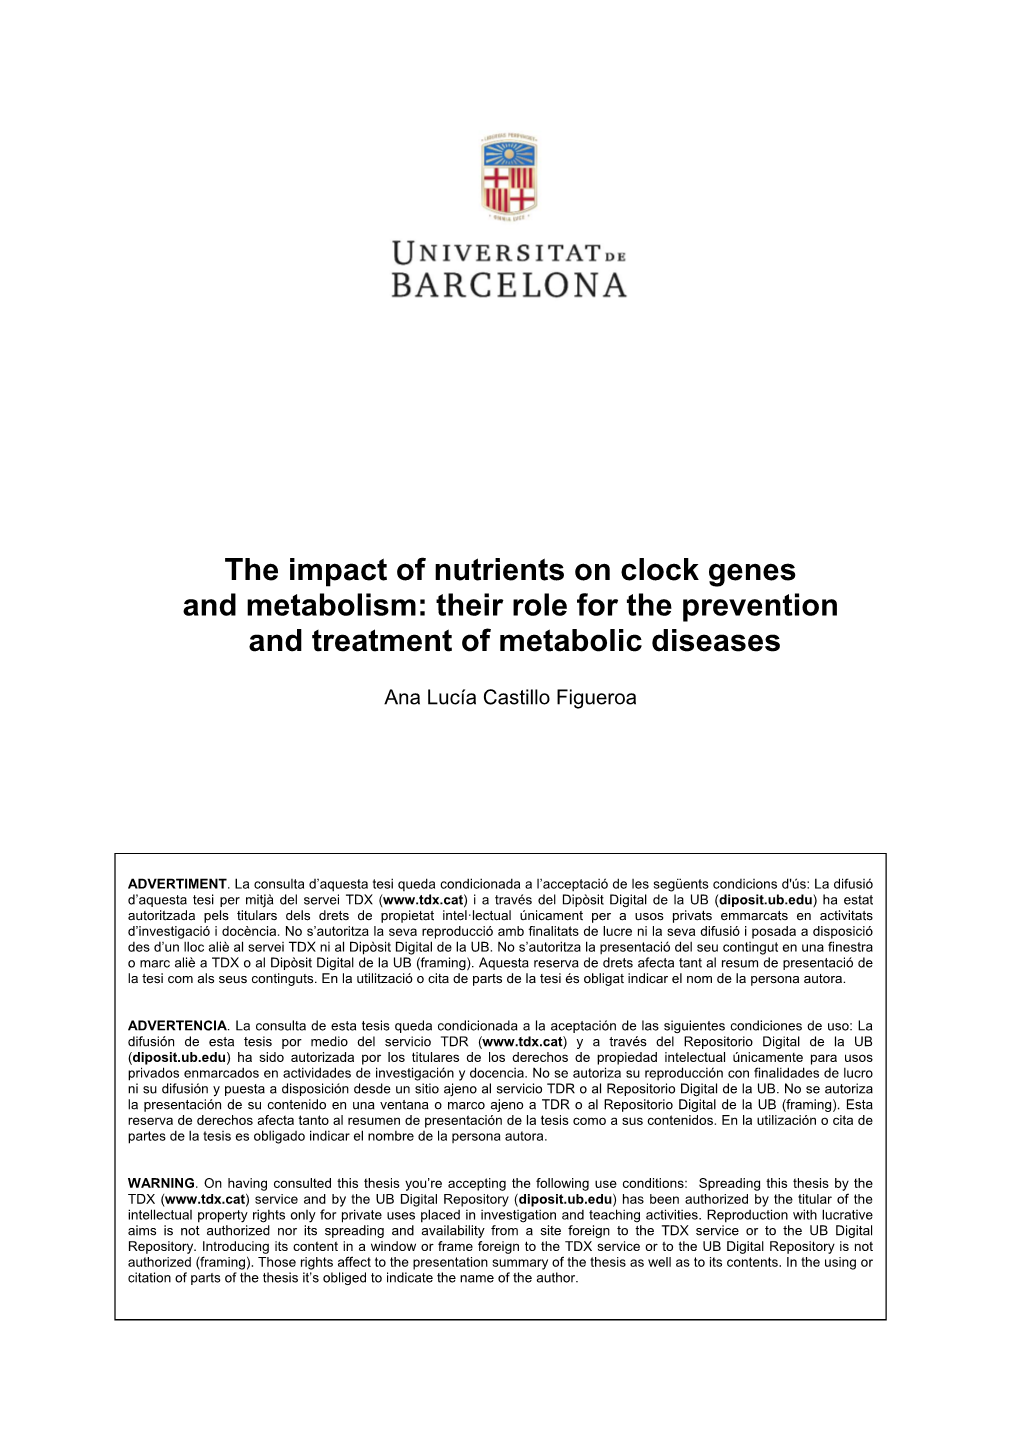 The Impact of Nutrients on Clock Genes and Metabolism: Their Role for the Prevention and Treatment of Metabolic Diseases